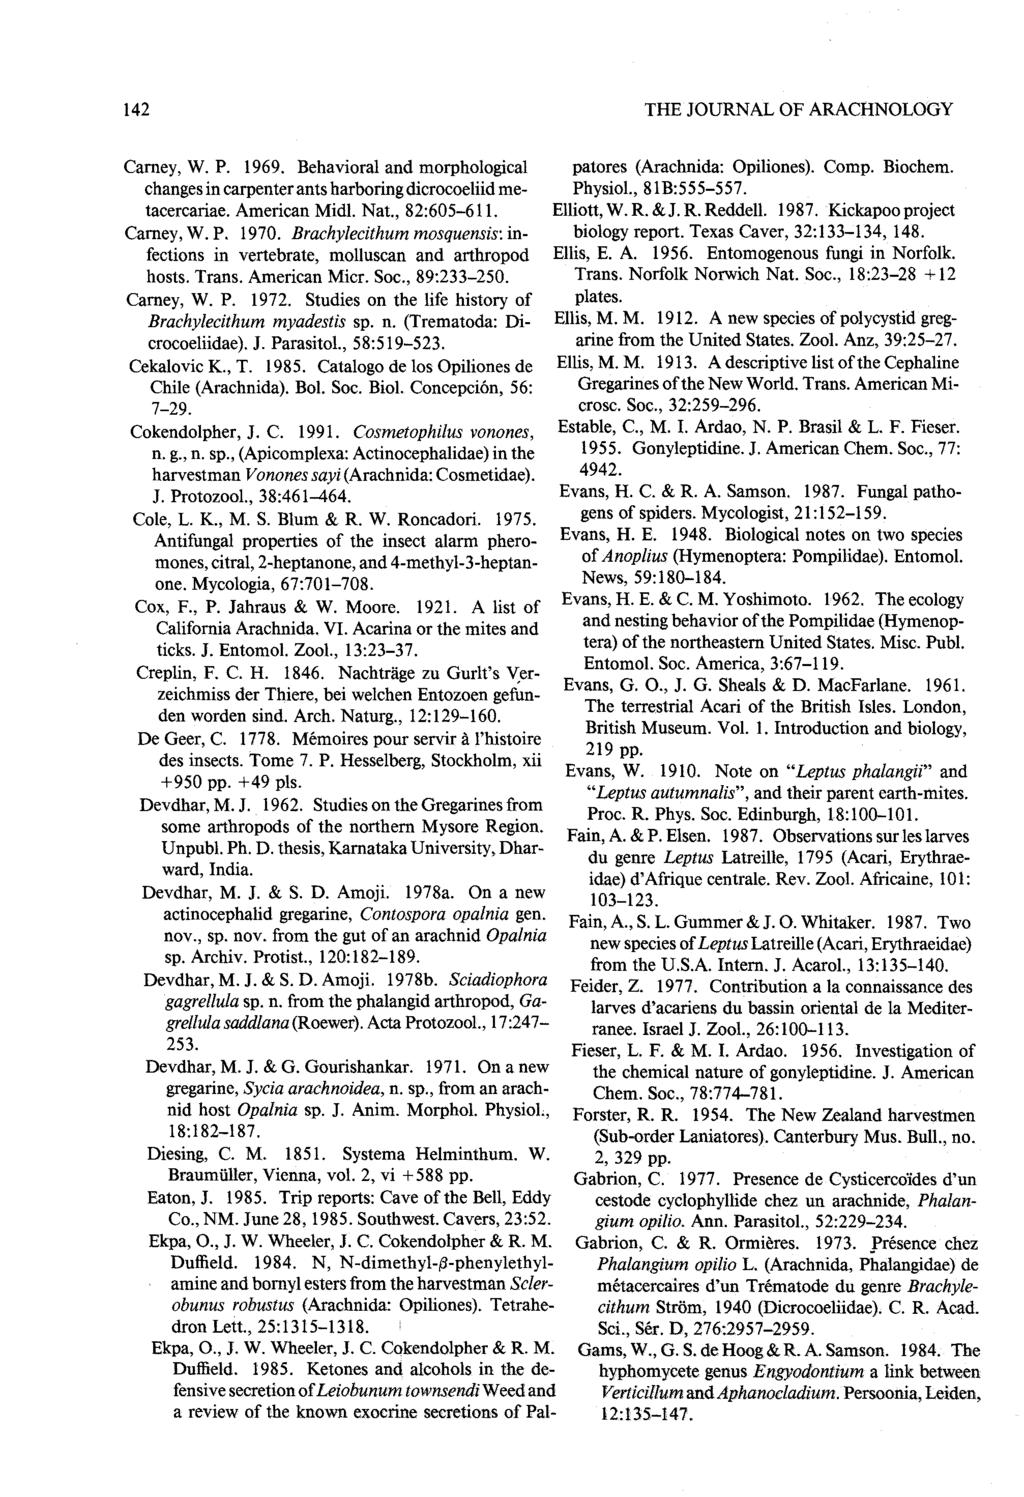 142 THE JOURNAL OF ARACHNOLOGY Carney, W. P. 1969. Behavioral and morphological changes in carpenter ants harboring dicrocoeliid me - tacercariae. American Midl. Nat., 82 :605 611. Carney, W. P. 1970.